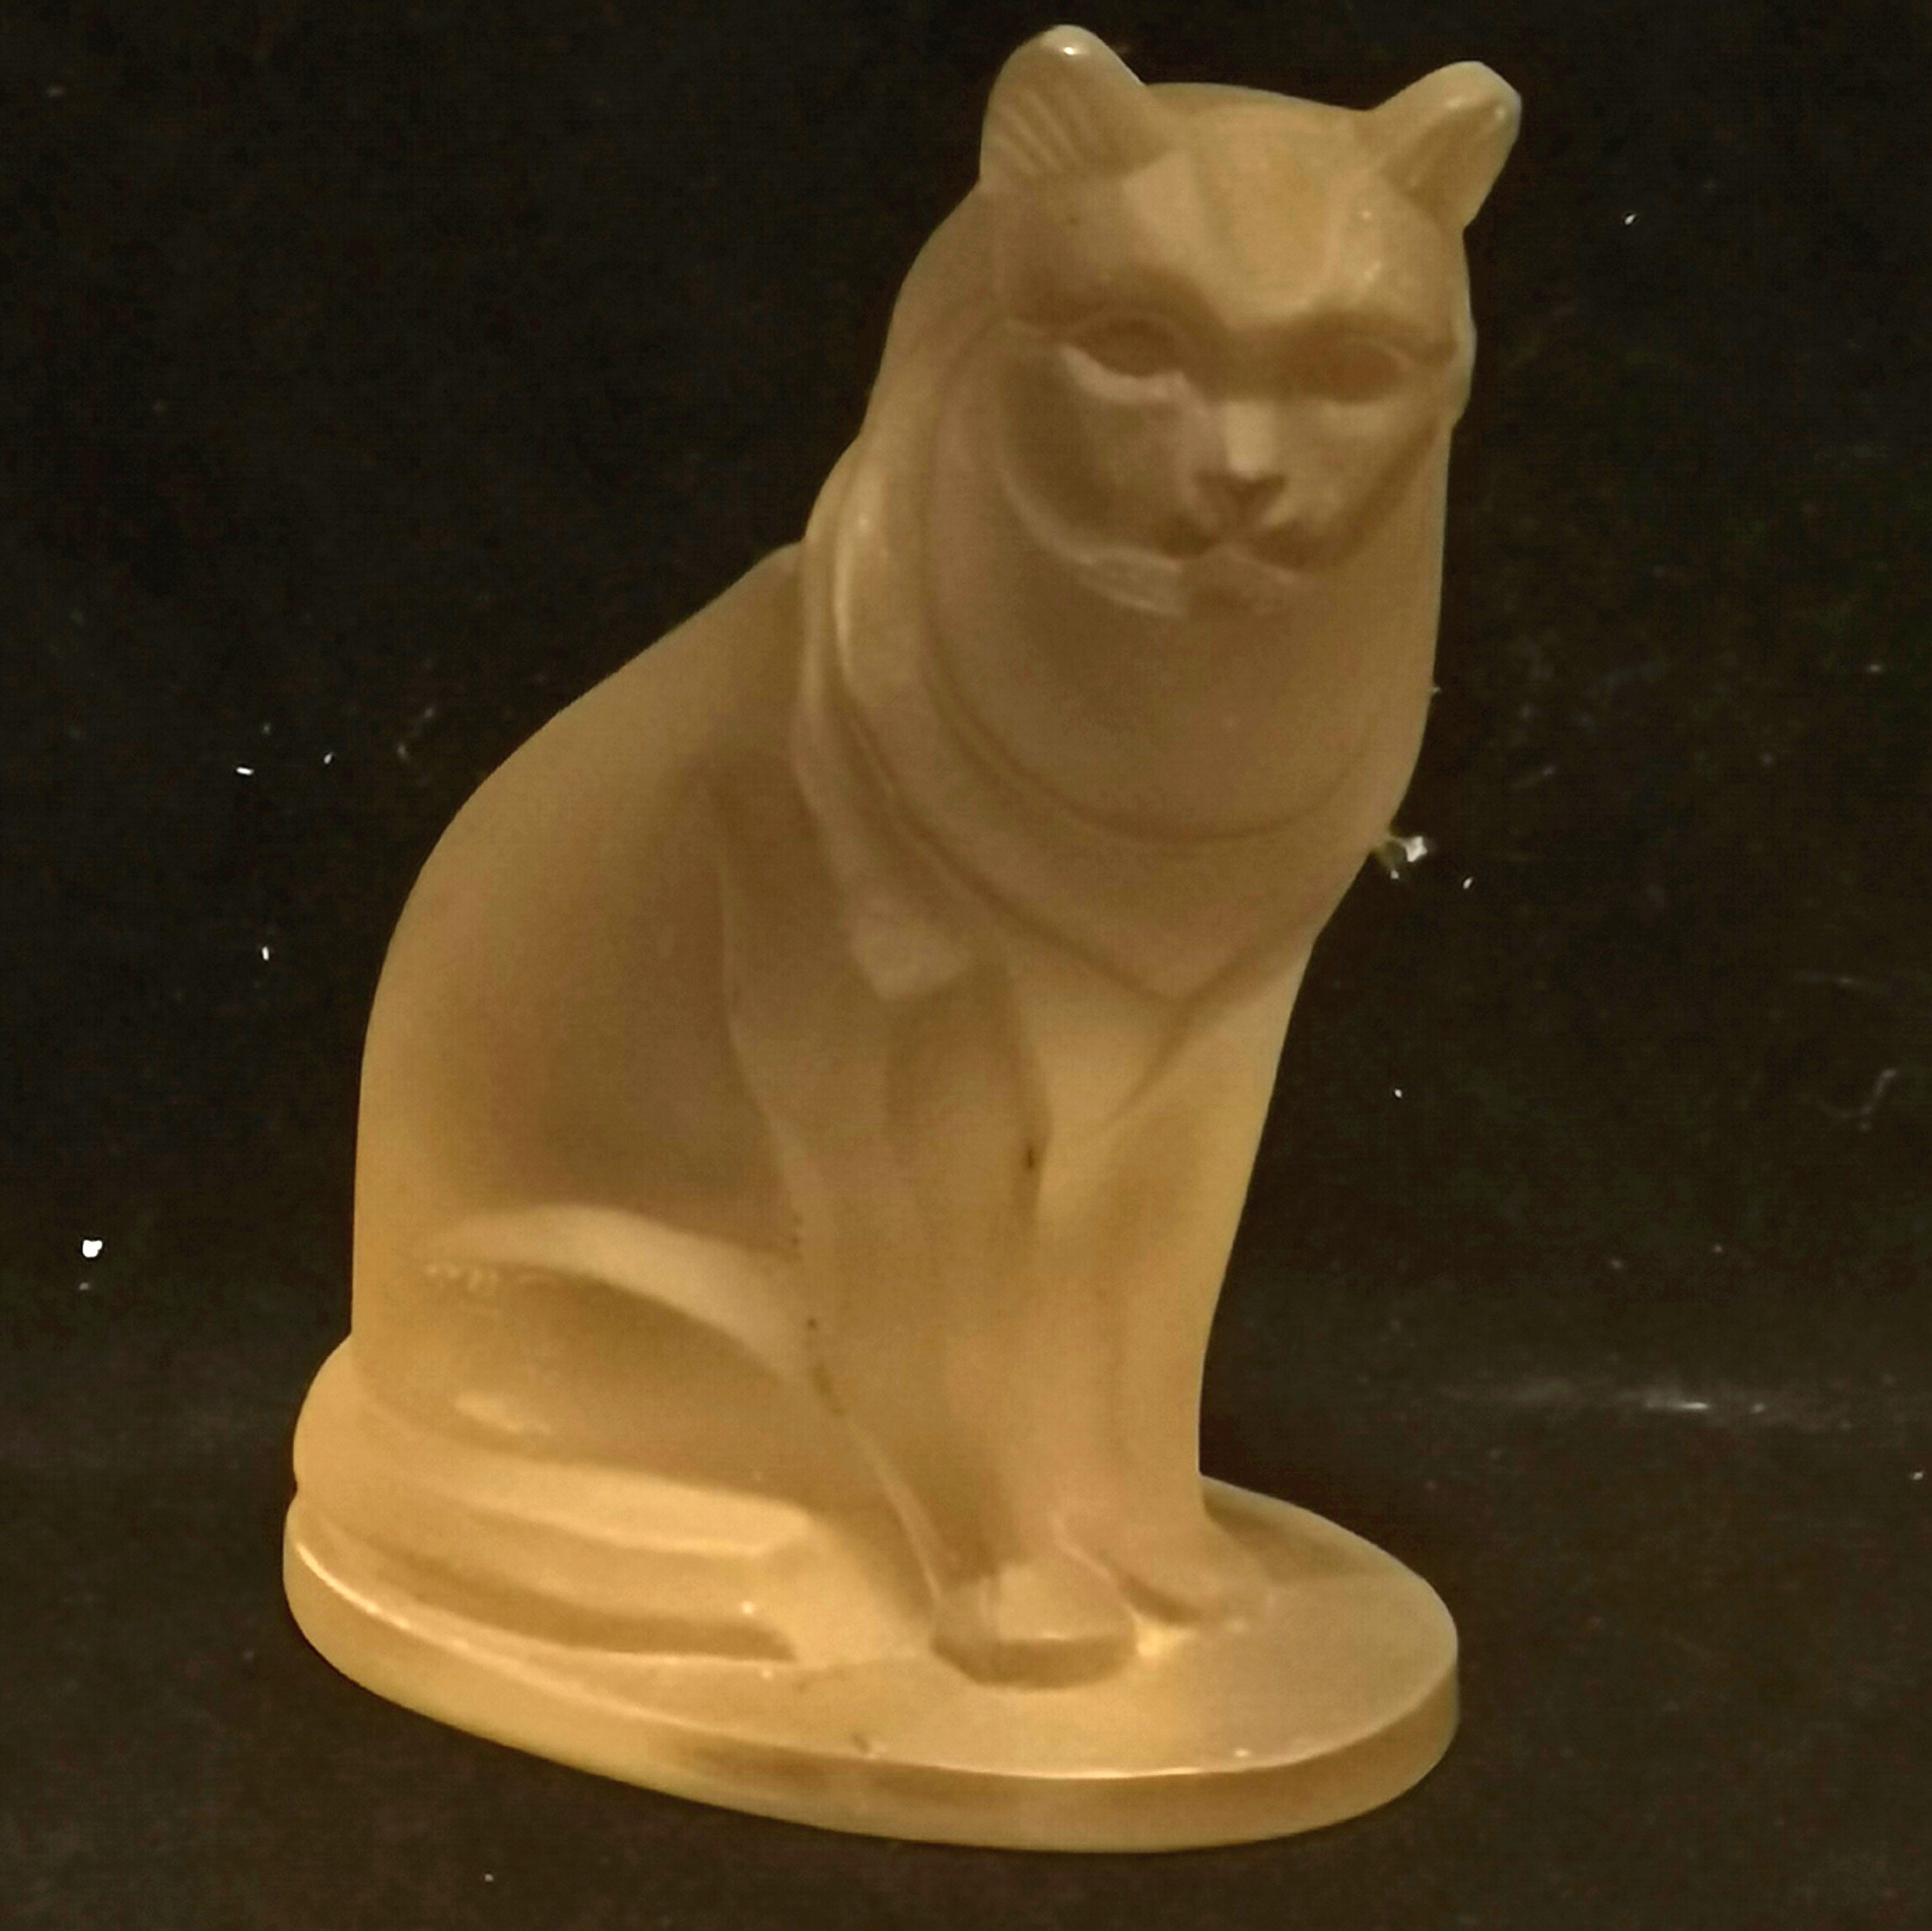 Vintage Bohemian frosted glass seated cat car mascot by Herman George Ascher - 9.5cm & has 1 small